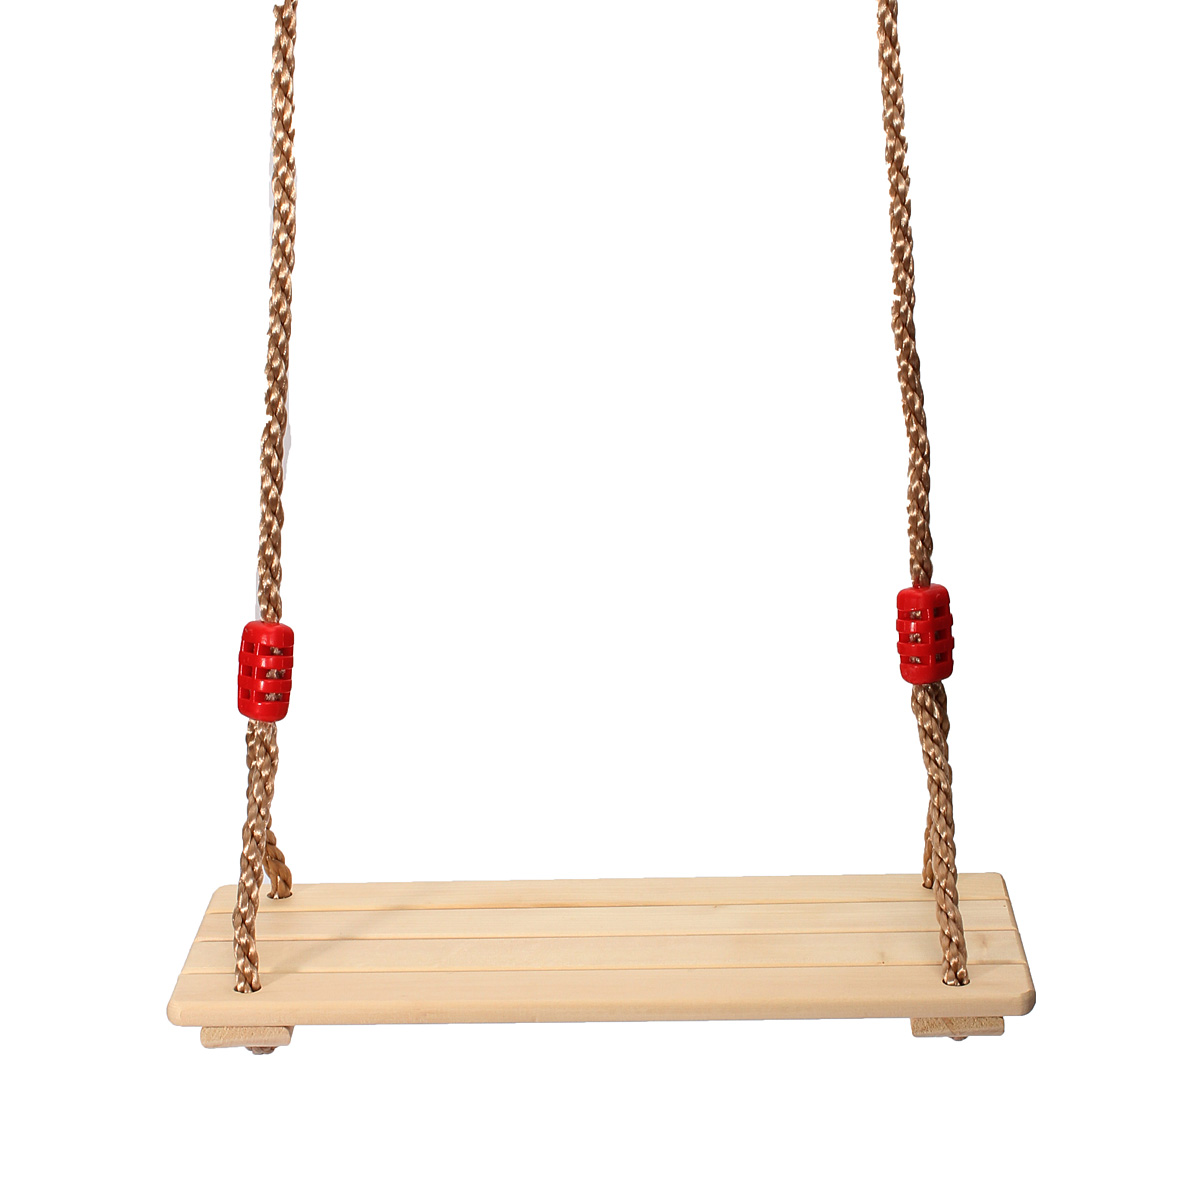 KING-DO-WAY-Outdoor-Wooden-Swing-Seat-Hanging-Chair-Porch-Swing-Camping-Garden-Patio-for-Children-935371-2